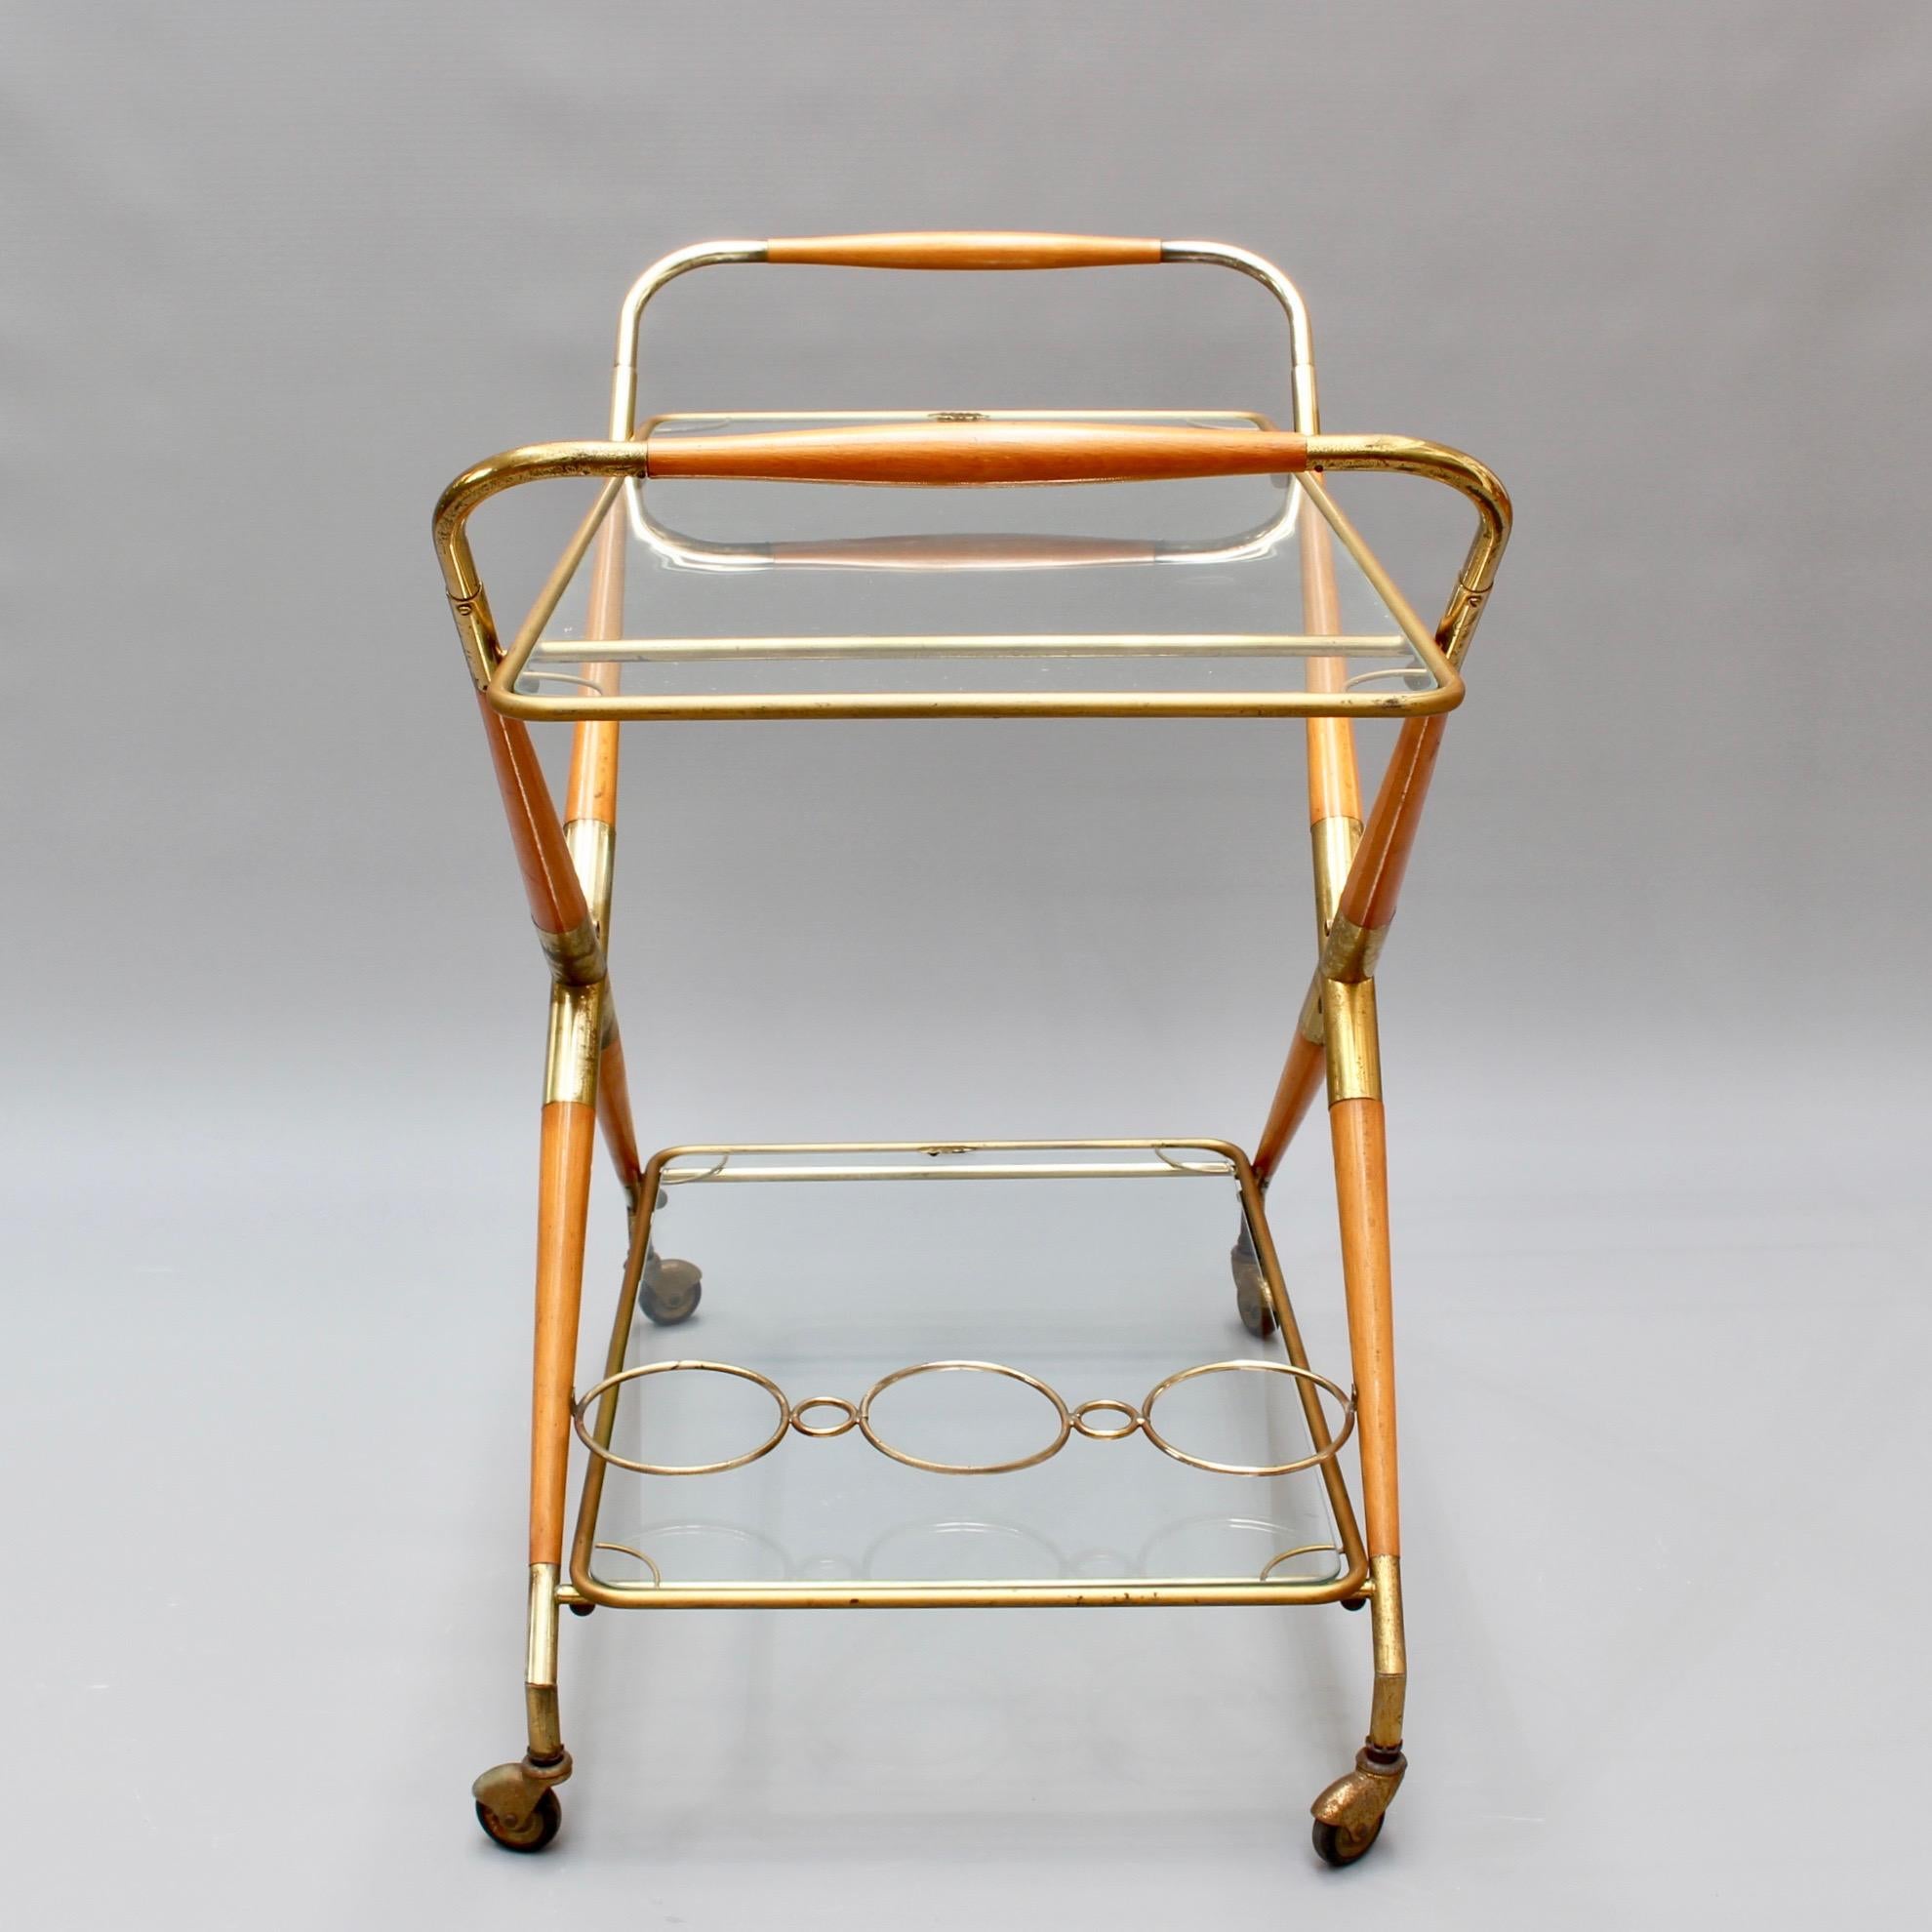 Brass Vintage Italian Serving Trolley or Bar Cart by Cesare Lacca, circa 1950s